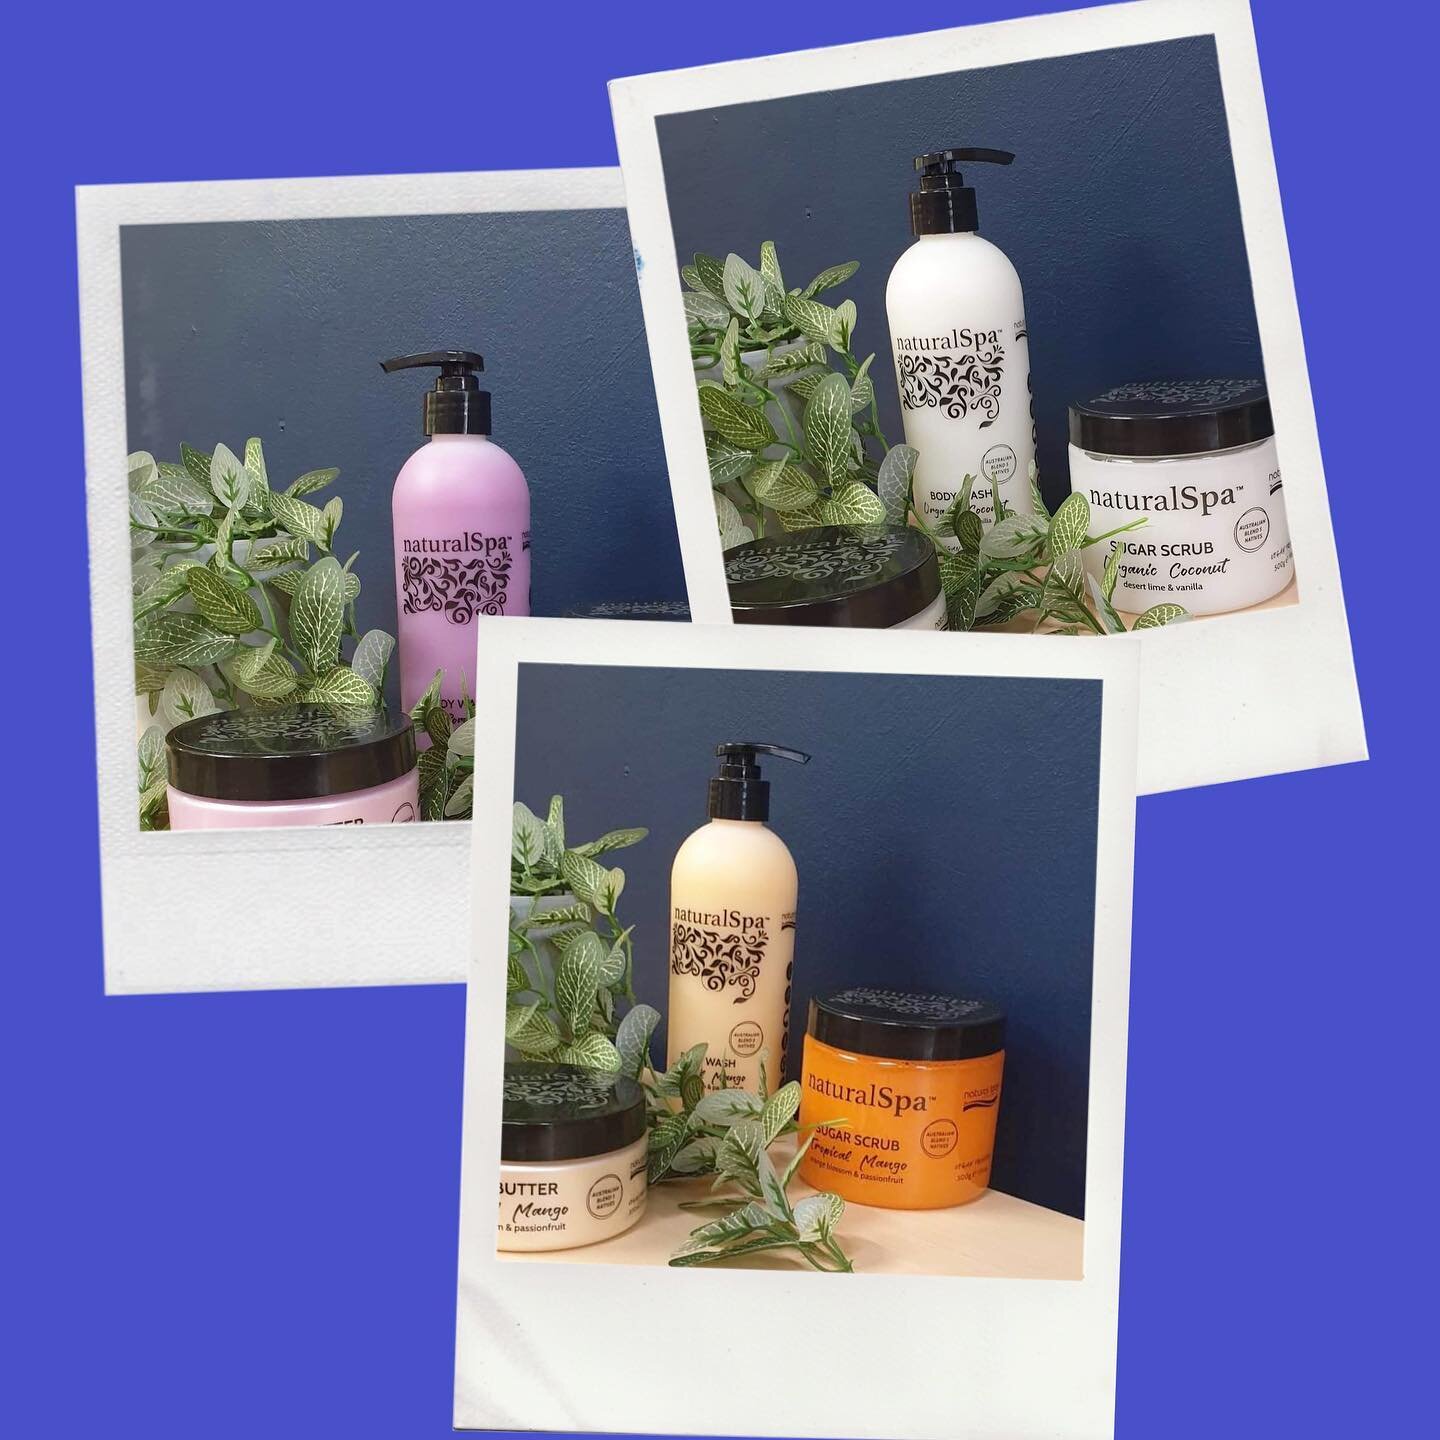 Great stocking filler idea these are Australian made, cruelty free, vegan friendly and biodegradable formulas #naturalspa #australiamade #puddletown #shoplocal #christmas #stockingfillers